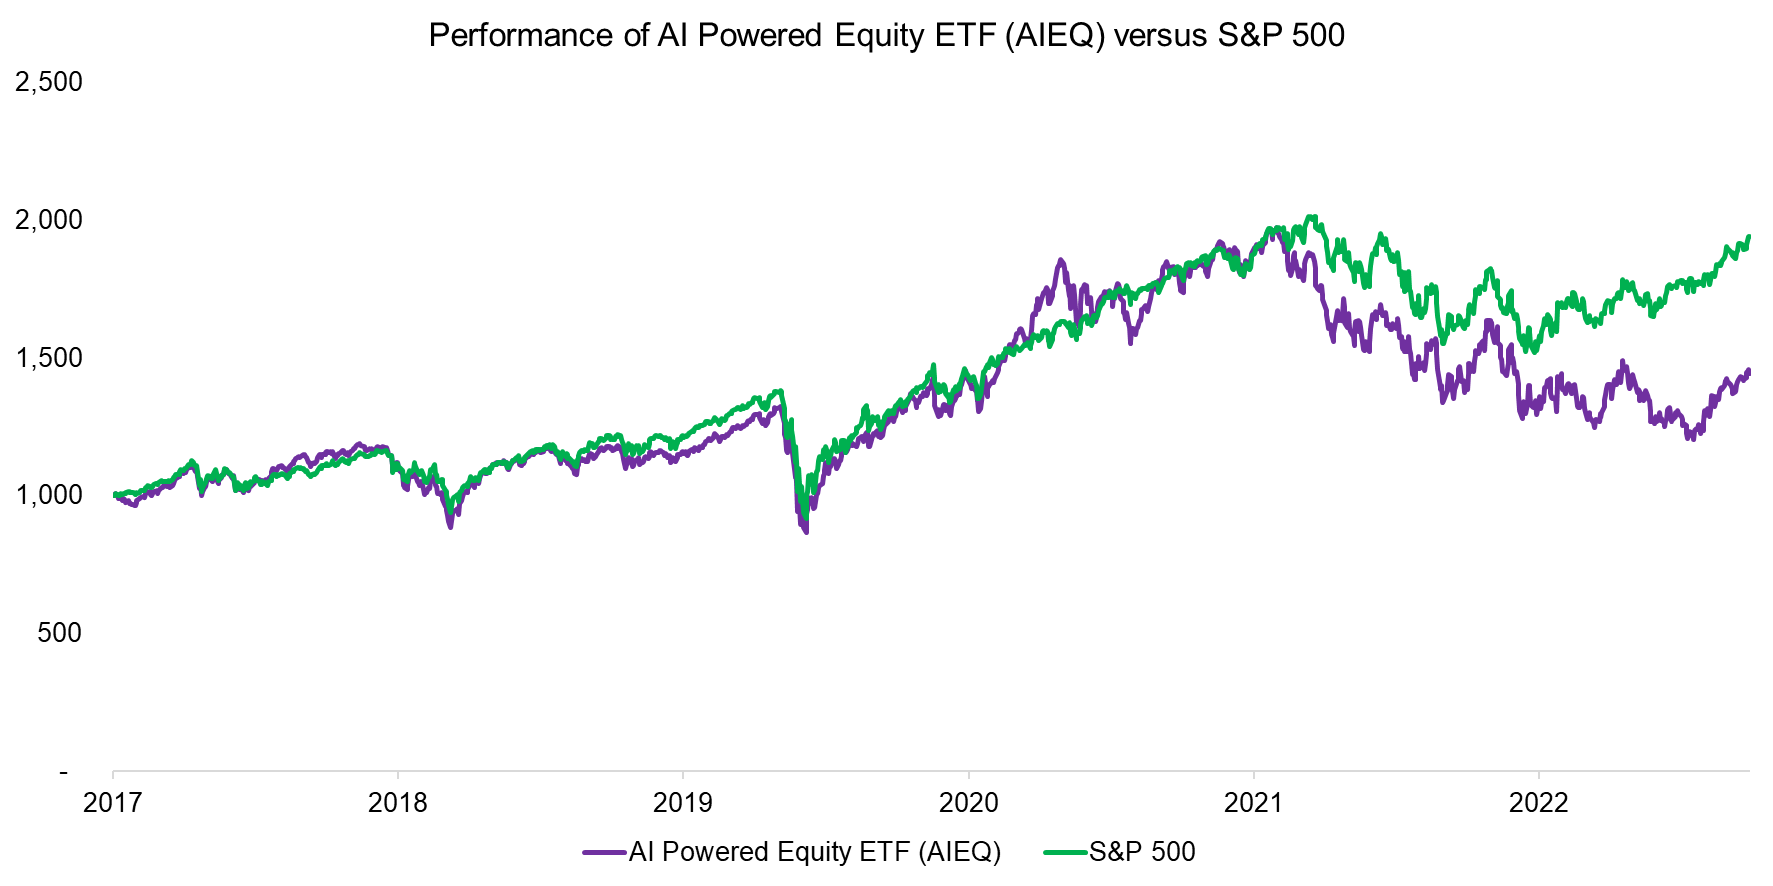 Performance of AI Powered Equity ETF (AIEQ) versus S&P 500